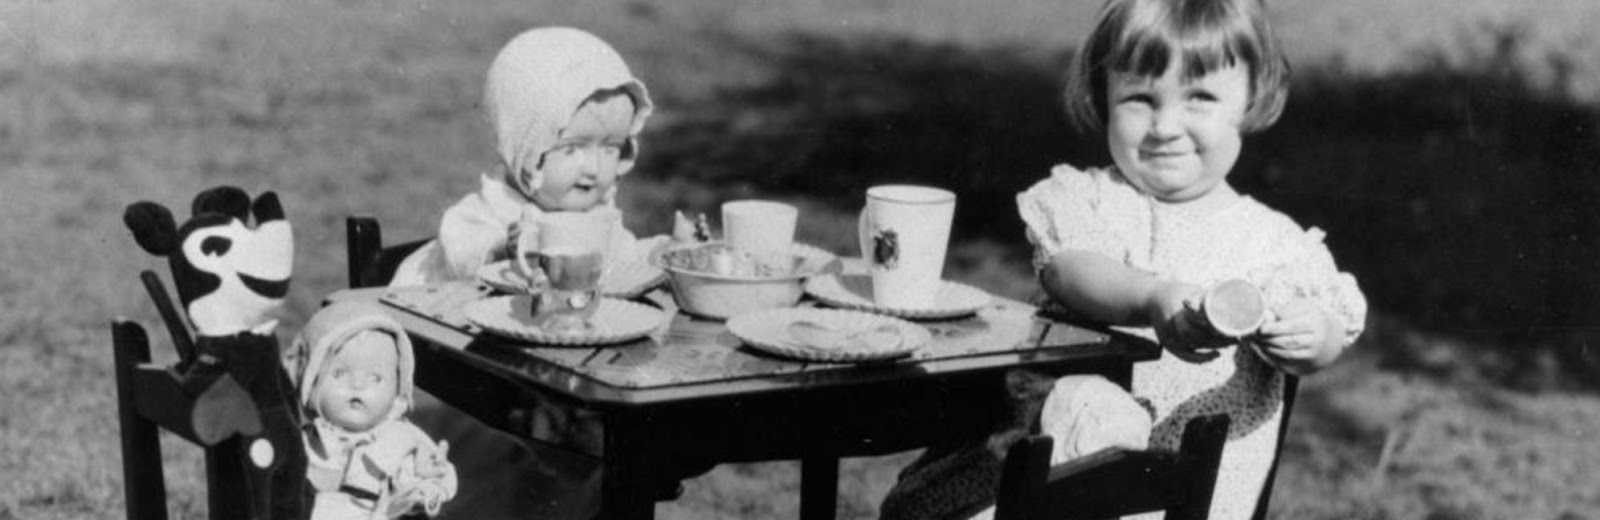 Young girl entertaining Mickey Mouse and other friends at a make-believe tea party, 1930s